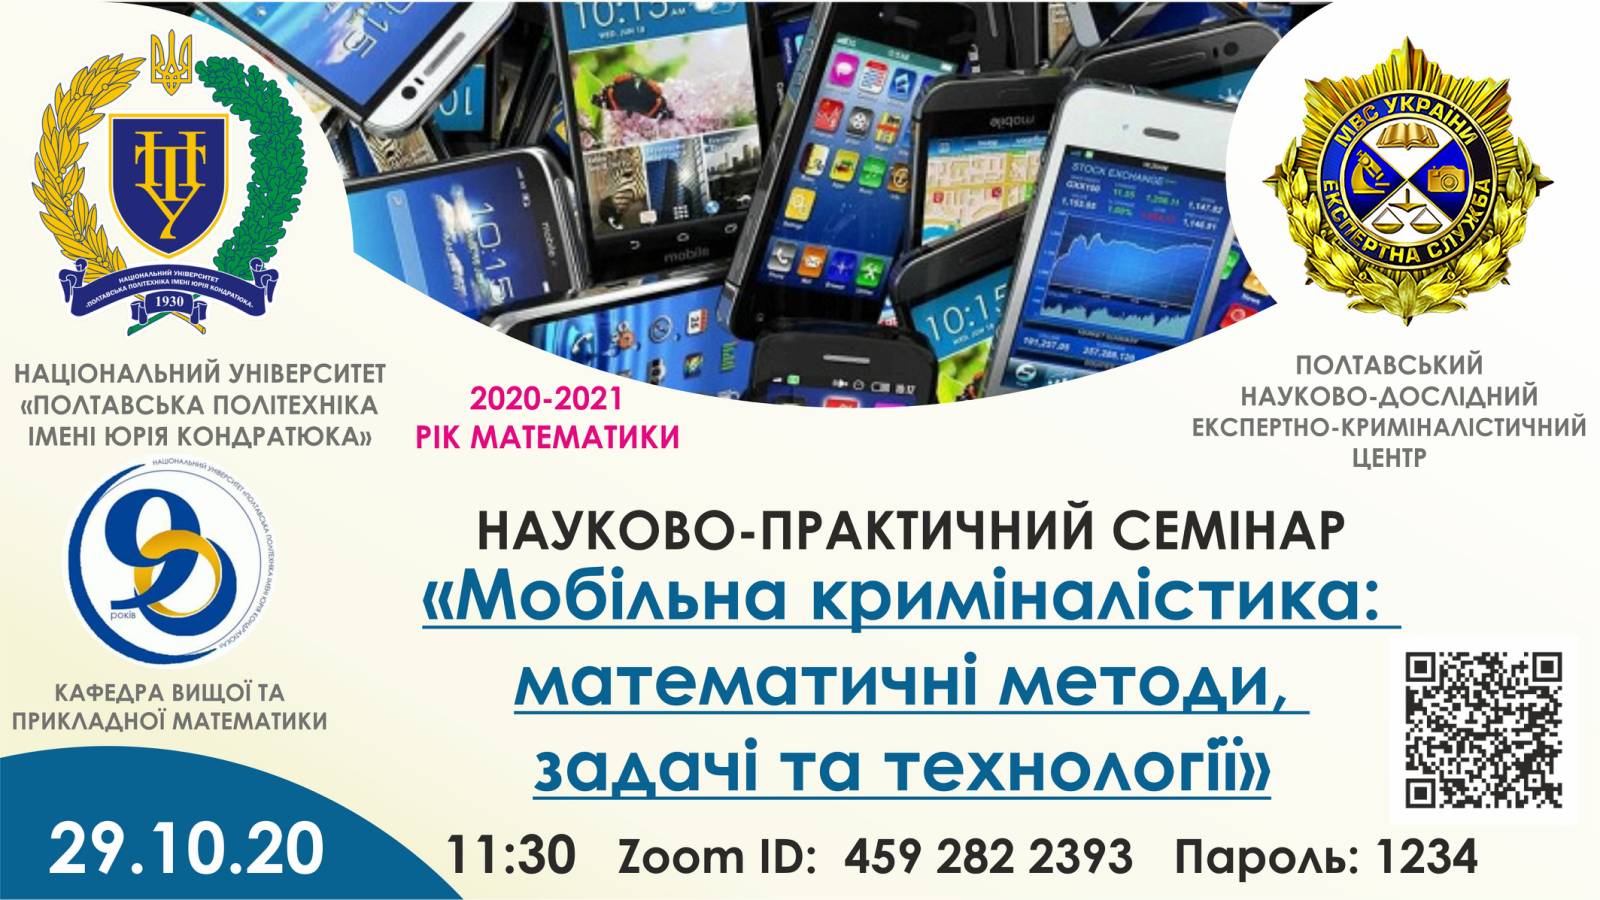 Mobile Forensics: Experts Speak About Mathematical Methods of Investigating Crimes Connected With Phones